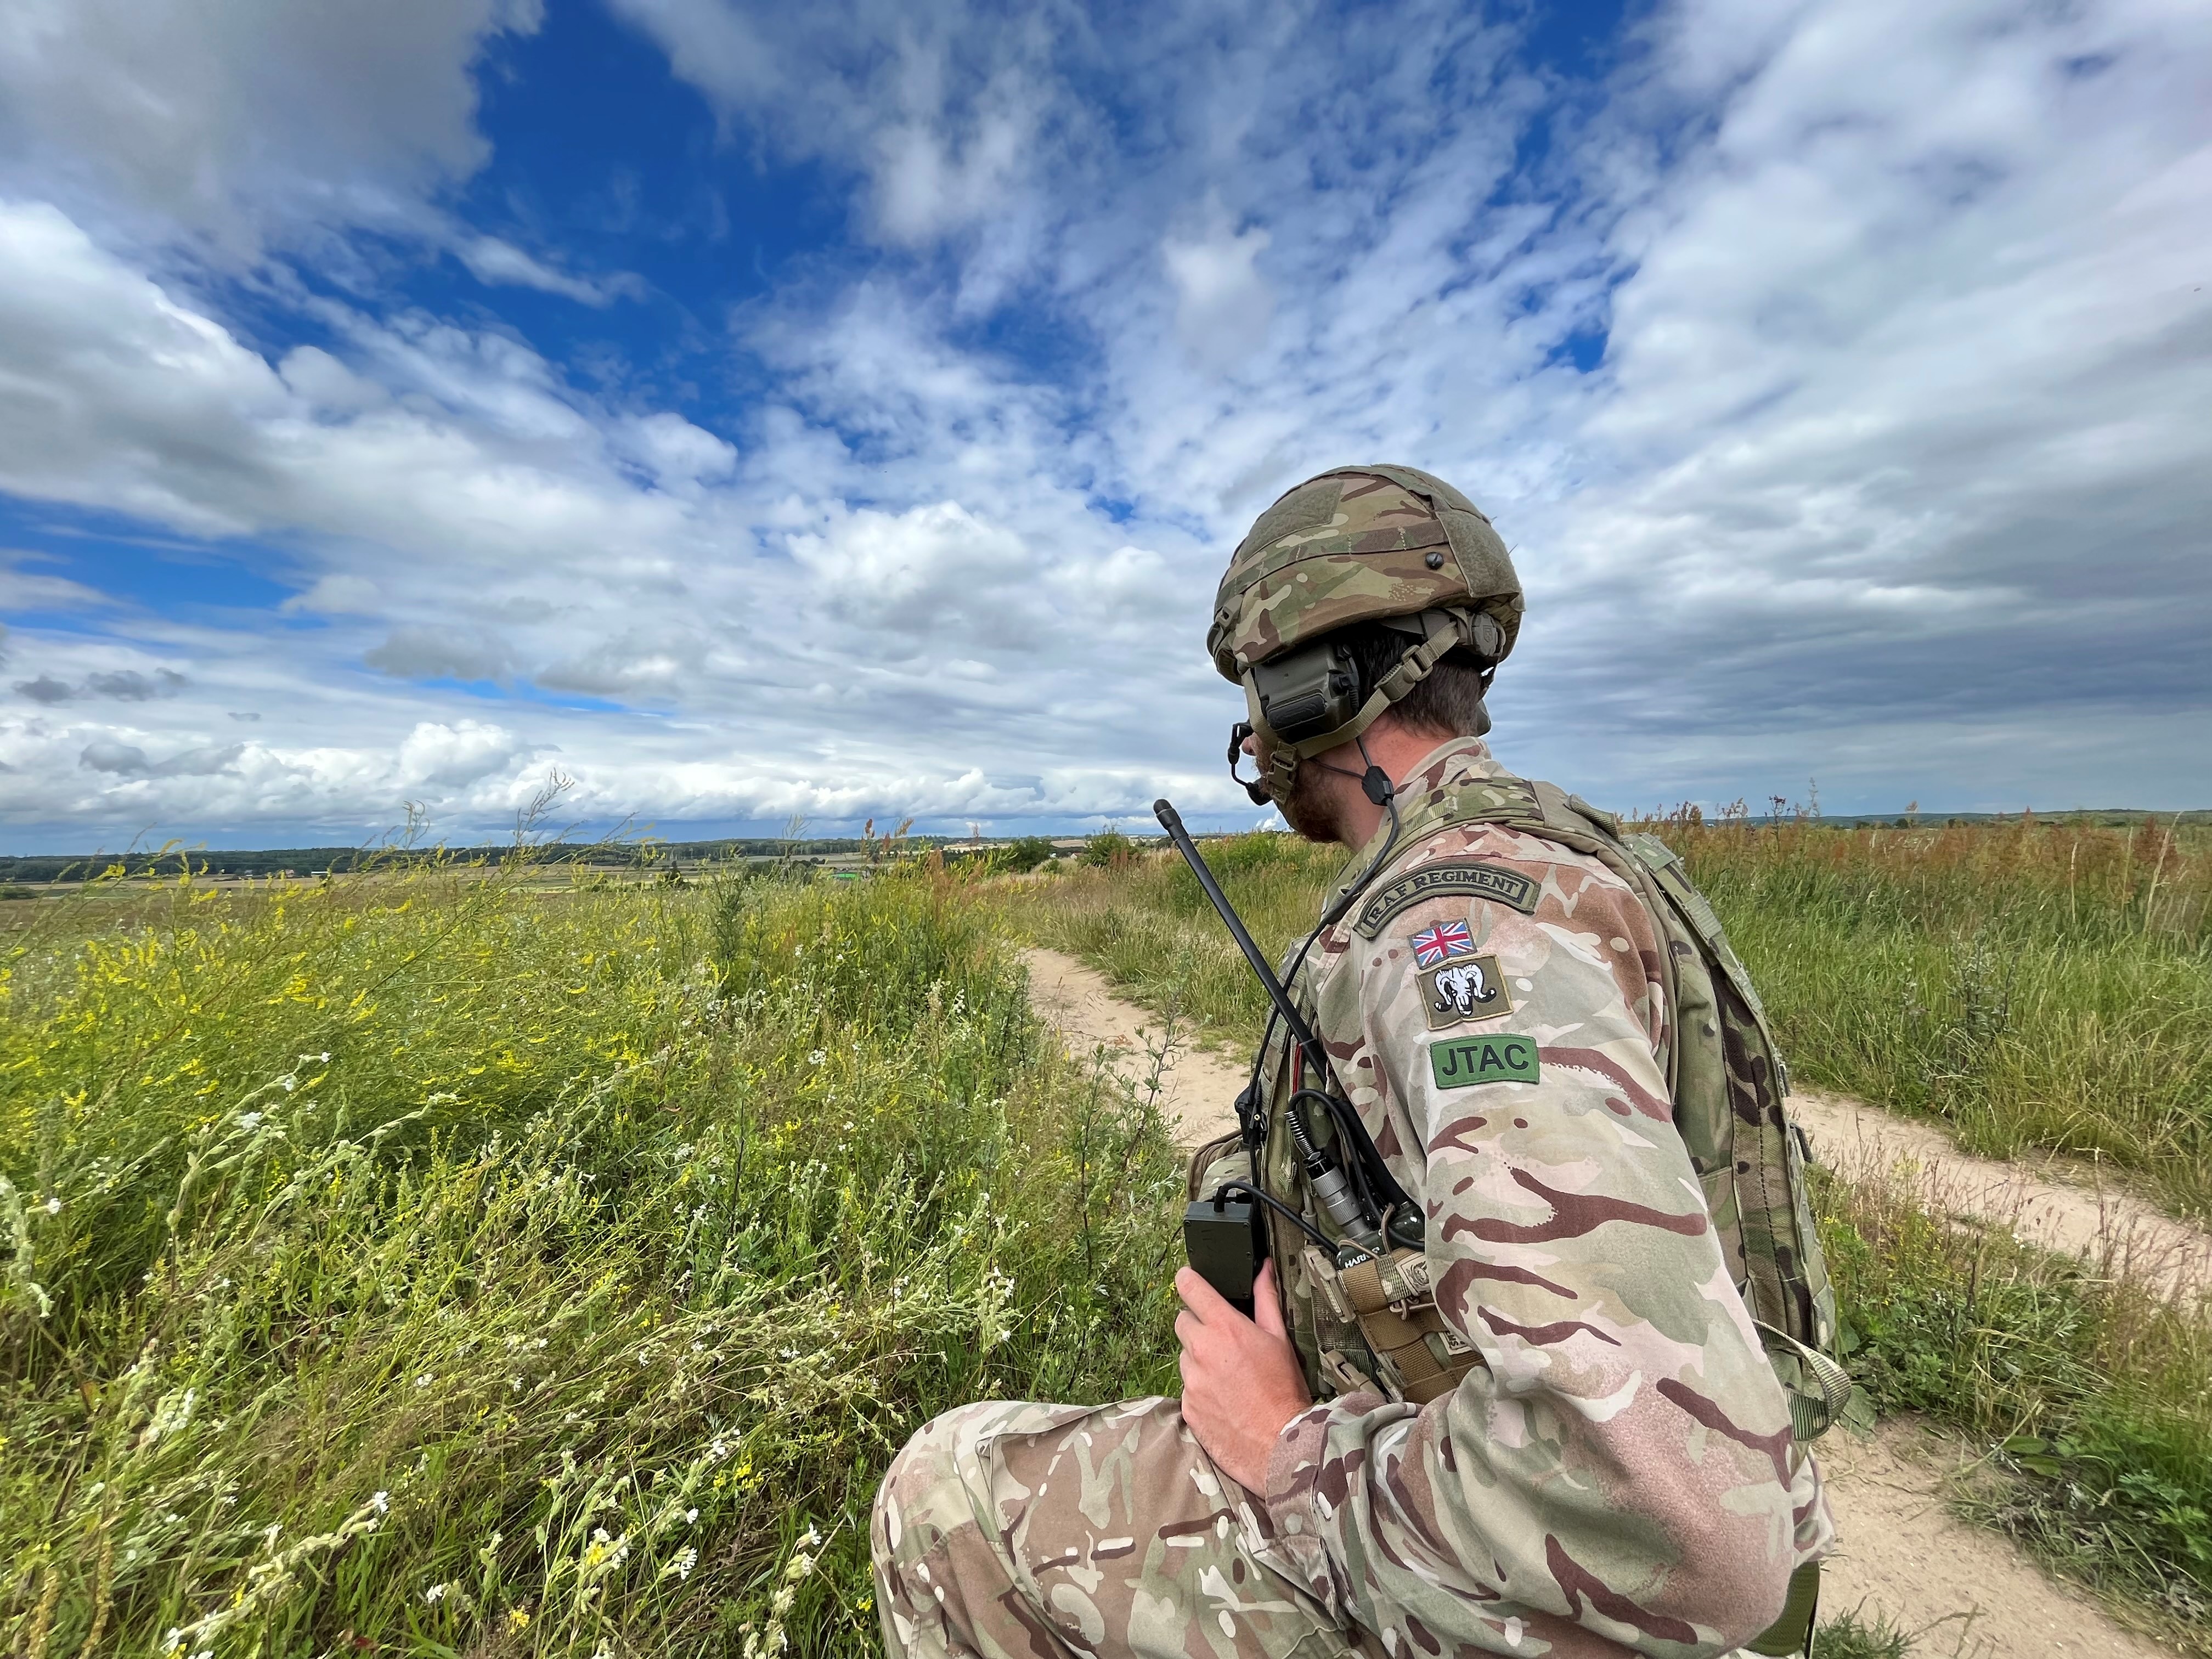 Image shows RAF Regiment crouching with radio, in a grassy landscape.